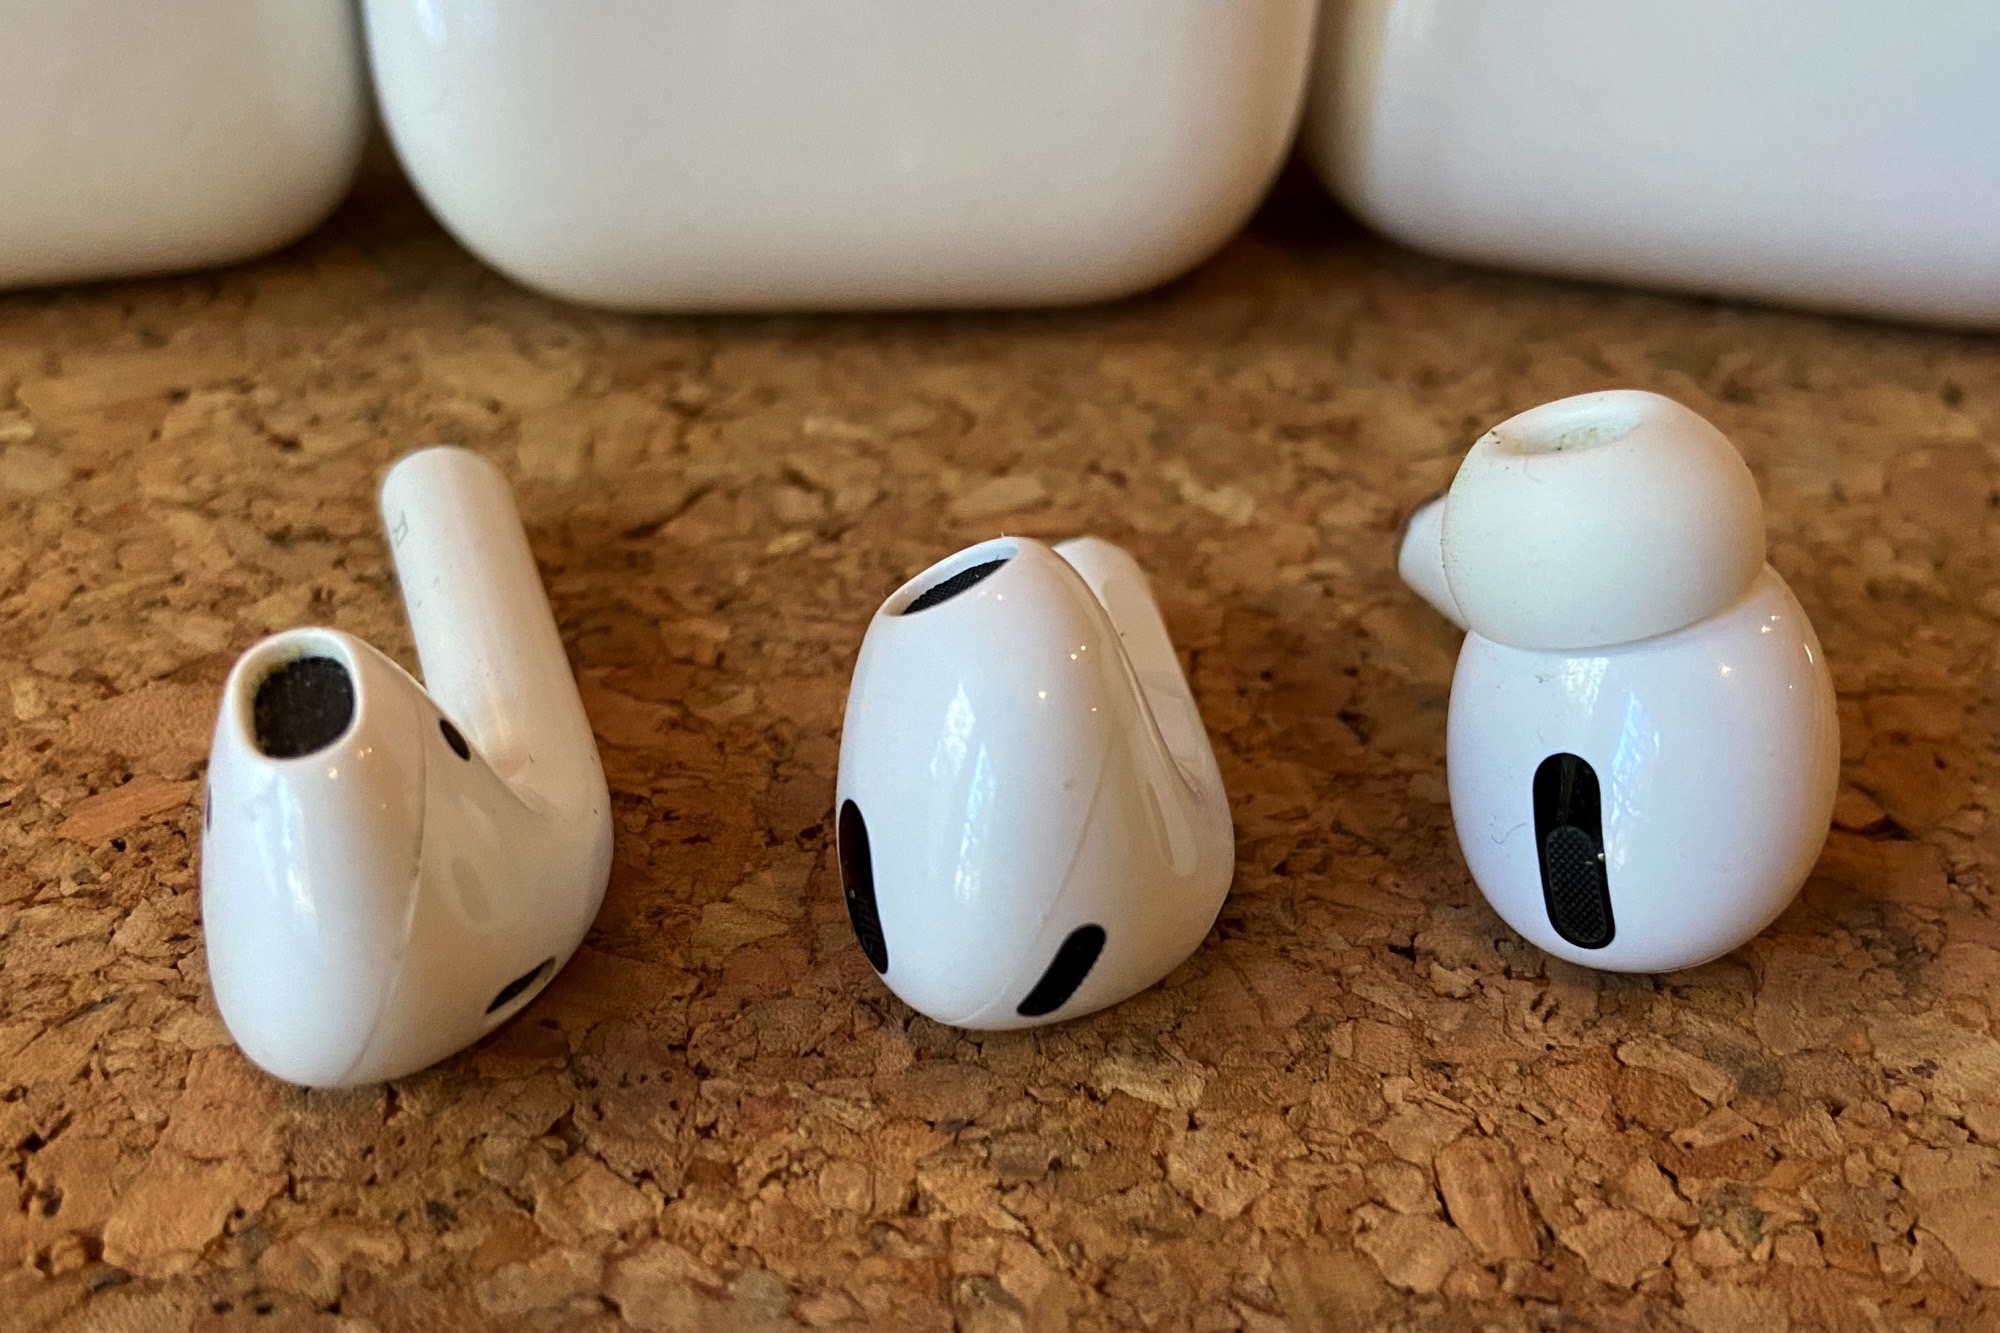 Apple AirPods (3rd Generation) review: Improvements in all the right places